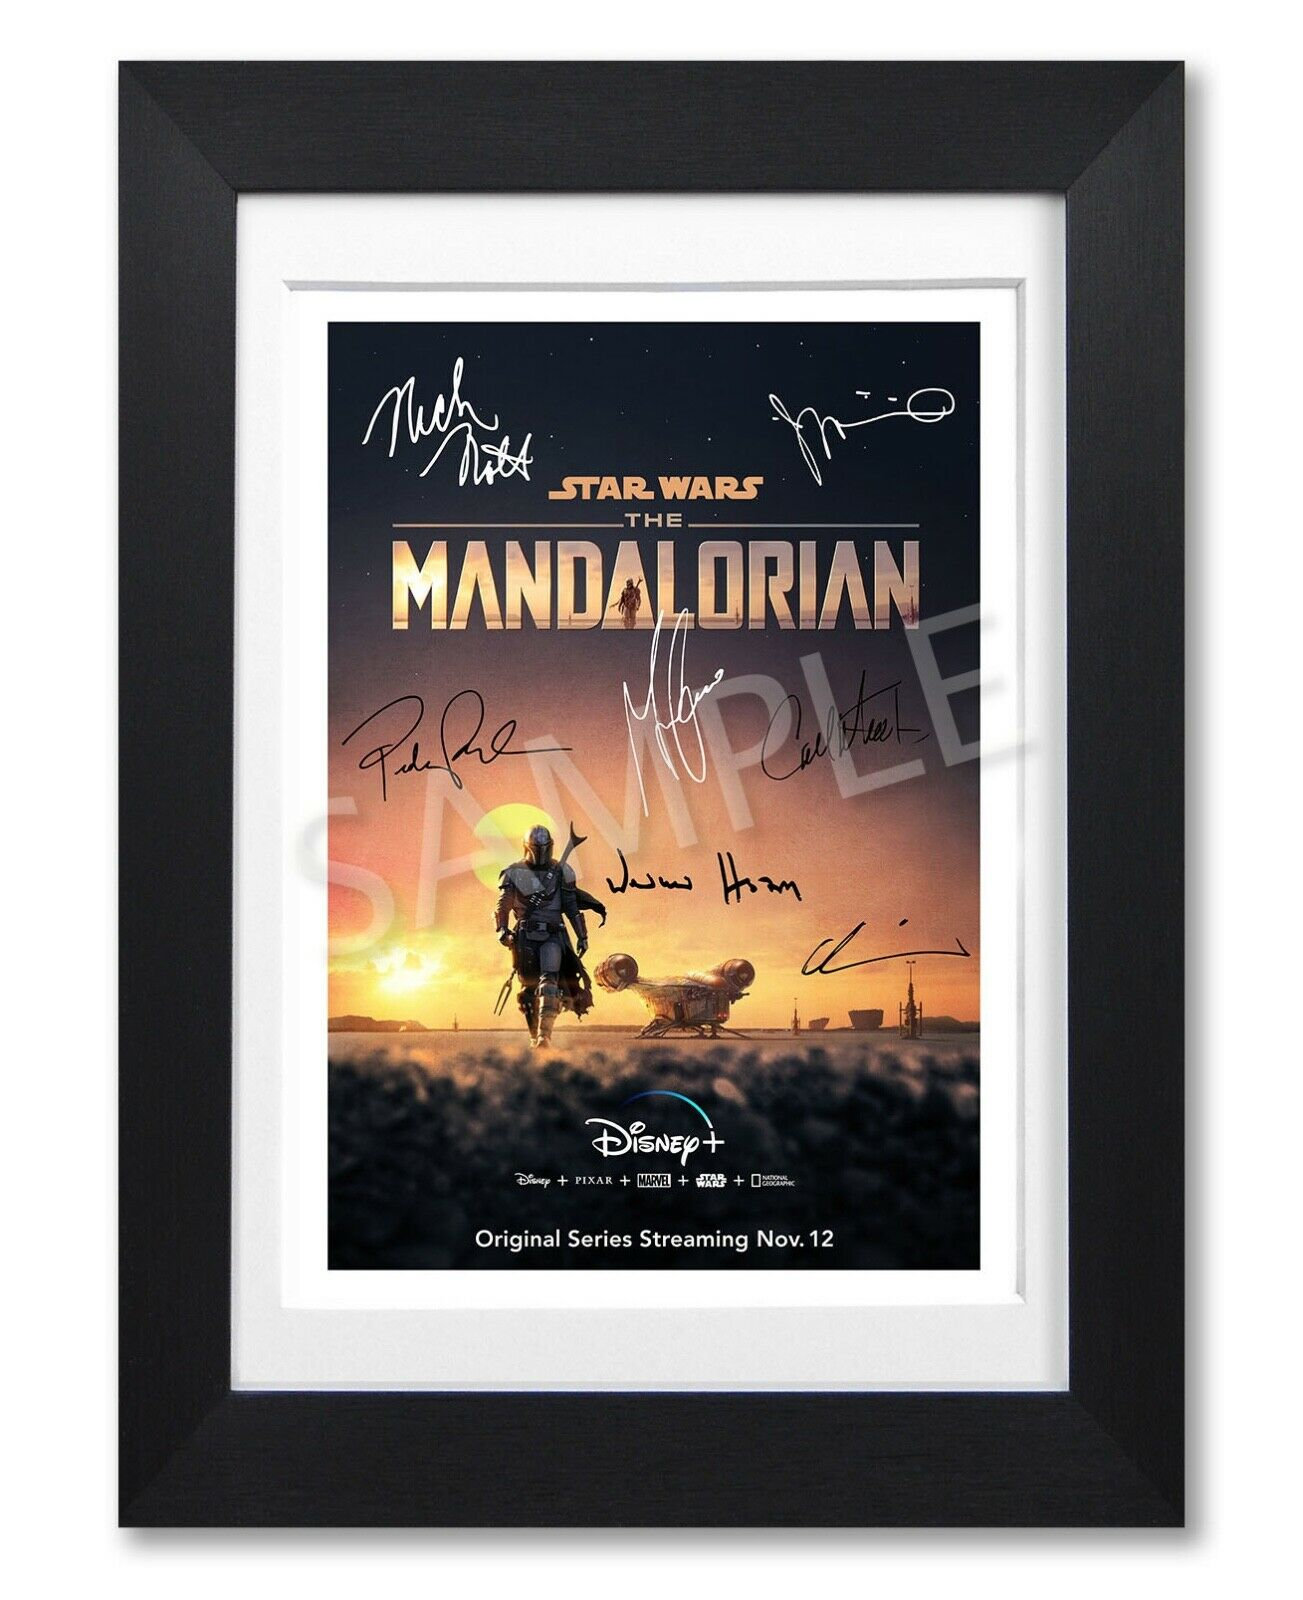 Star Wars The Mandalorian Poster 12 x 8 Inches Signed Print Autograph by 5 Cast 